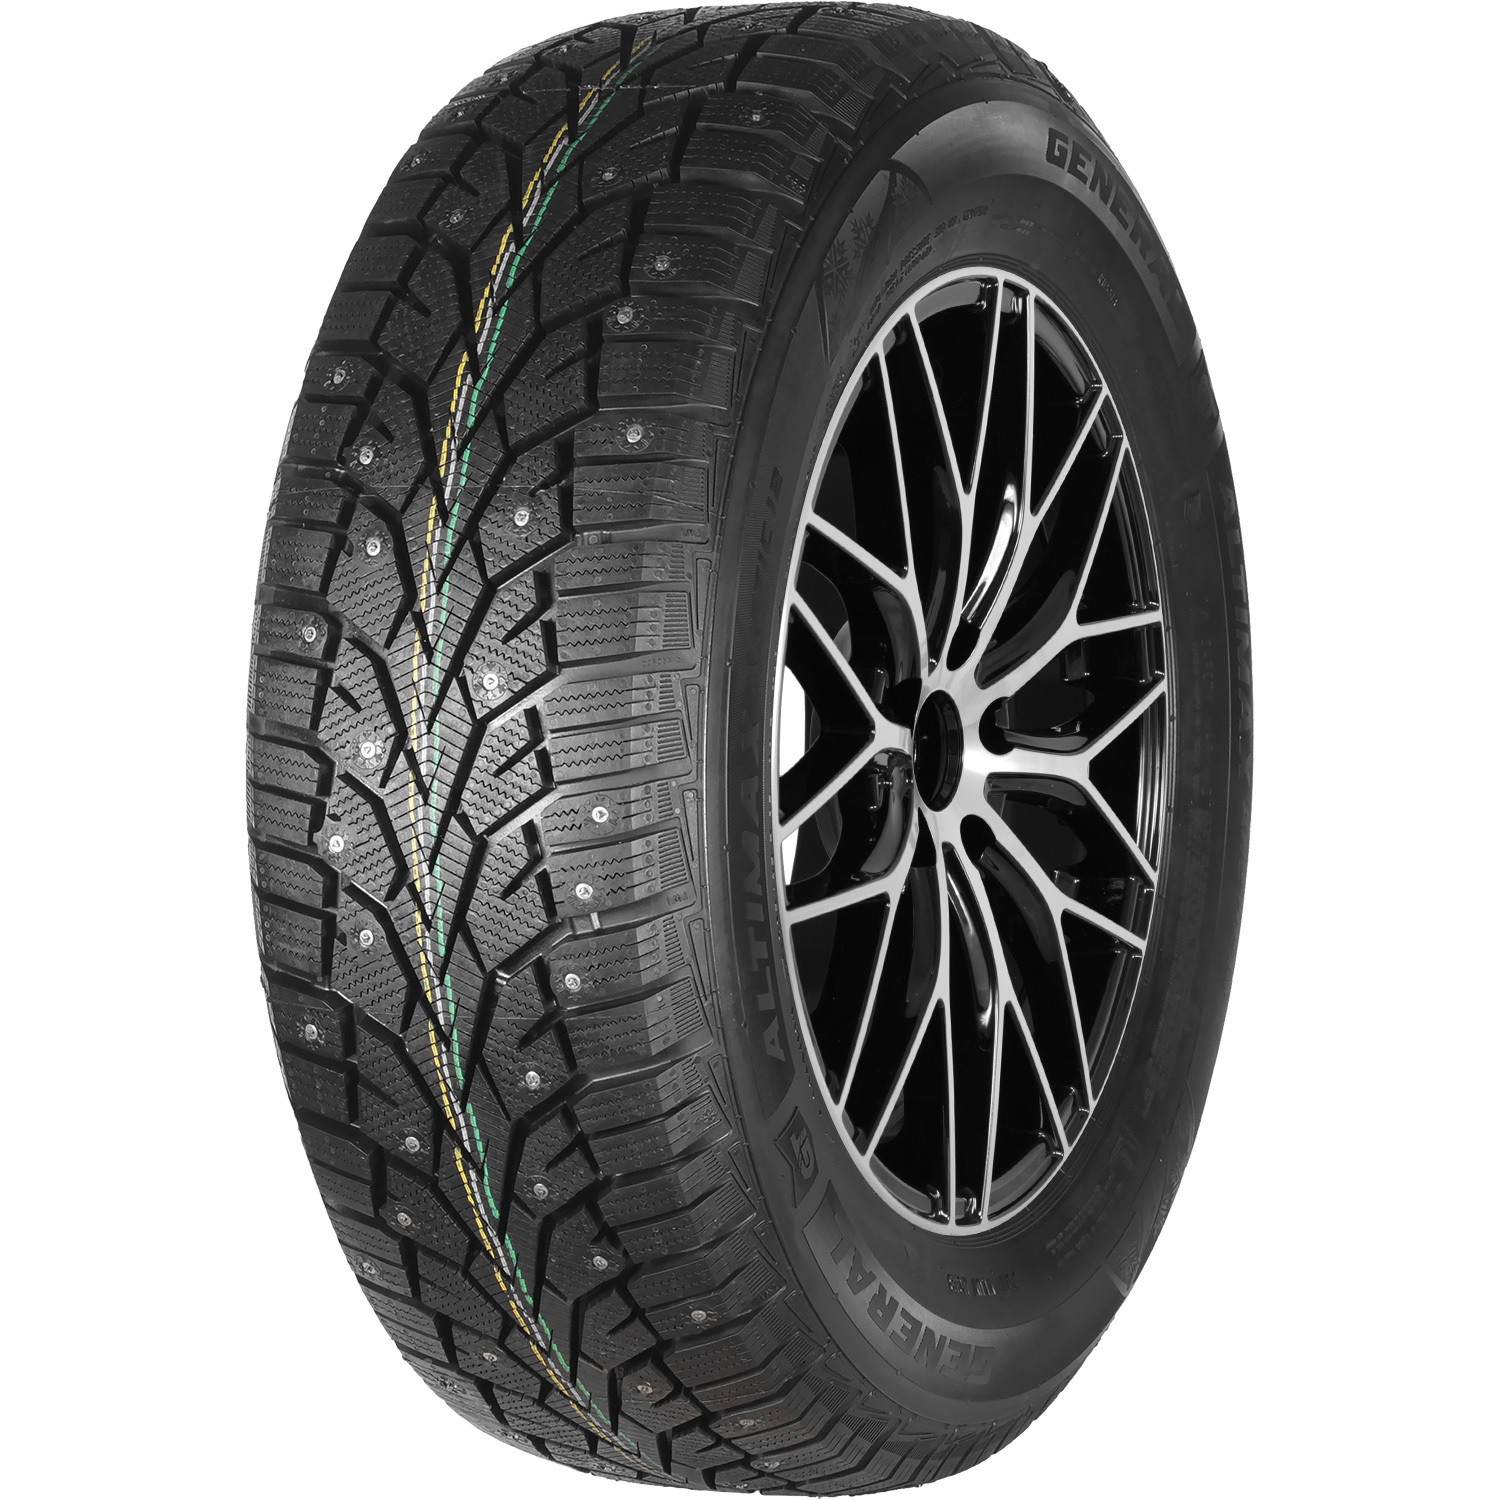 Автомобильная шина General Tire Altimax Arctic 12 225/65 R17 106T Шипованные tire cover central ocean sunrise sun moon spare tire cover select tire size back up camera in menu custom sized to any